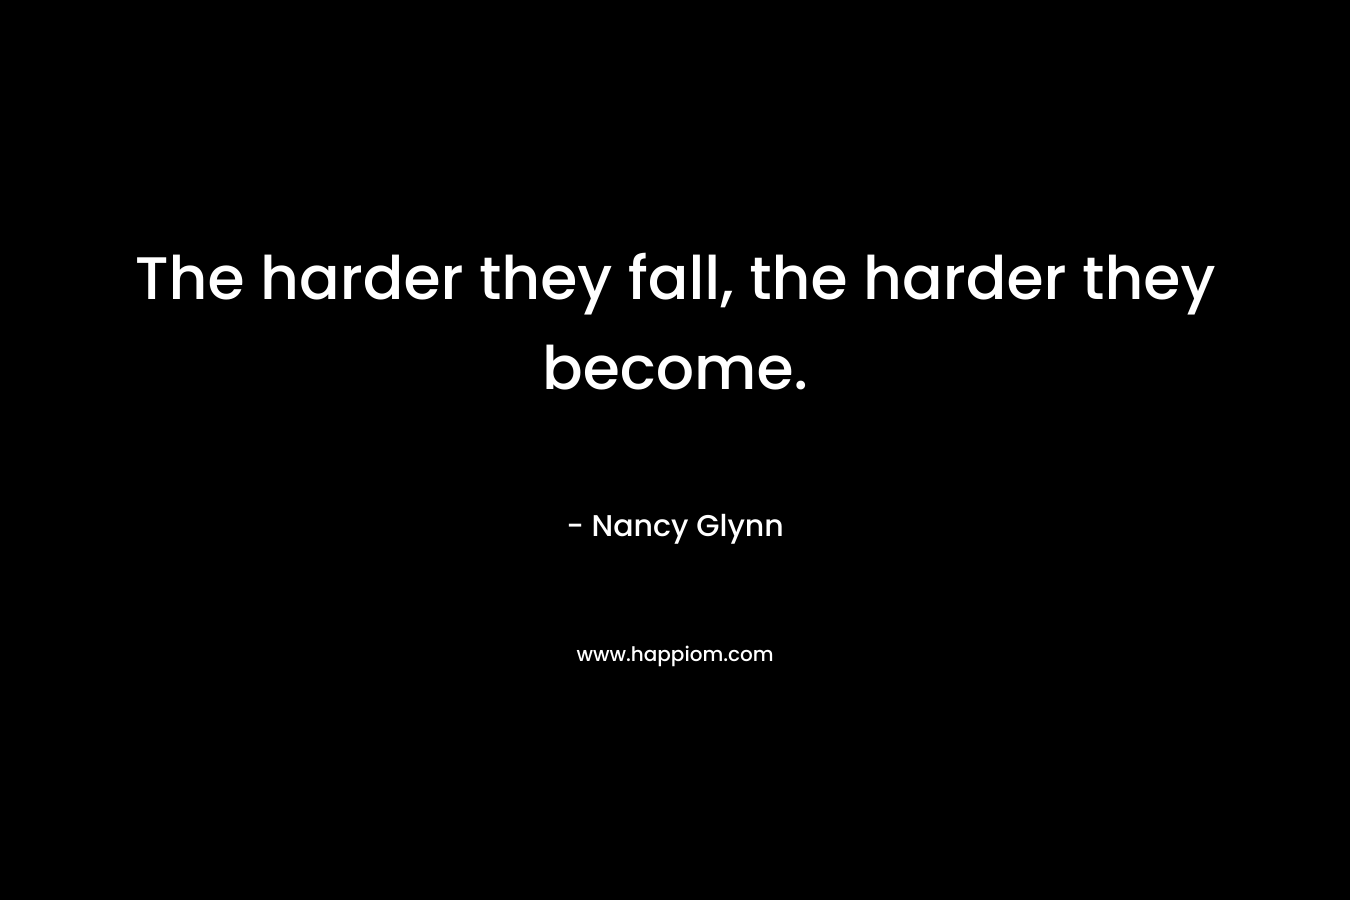 The harder they fall, the harder they become. – Nancy Glynn